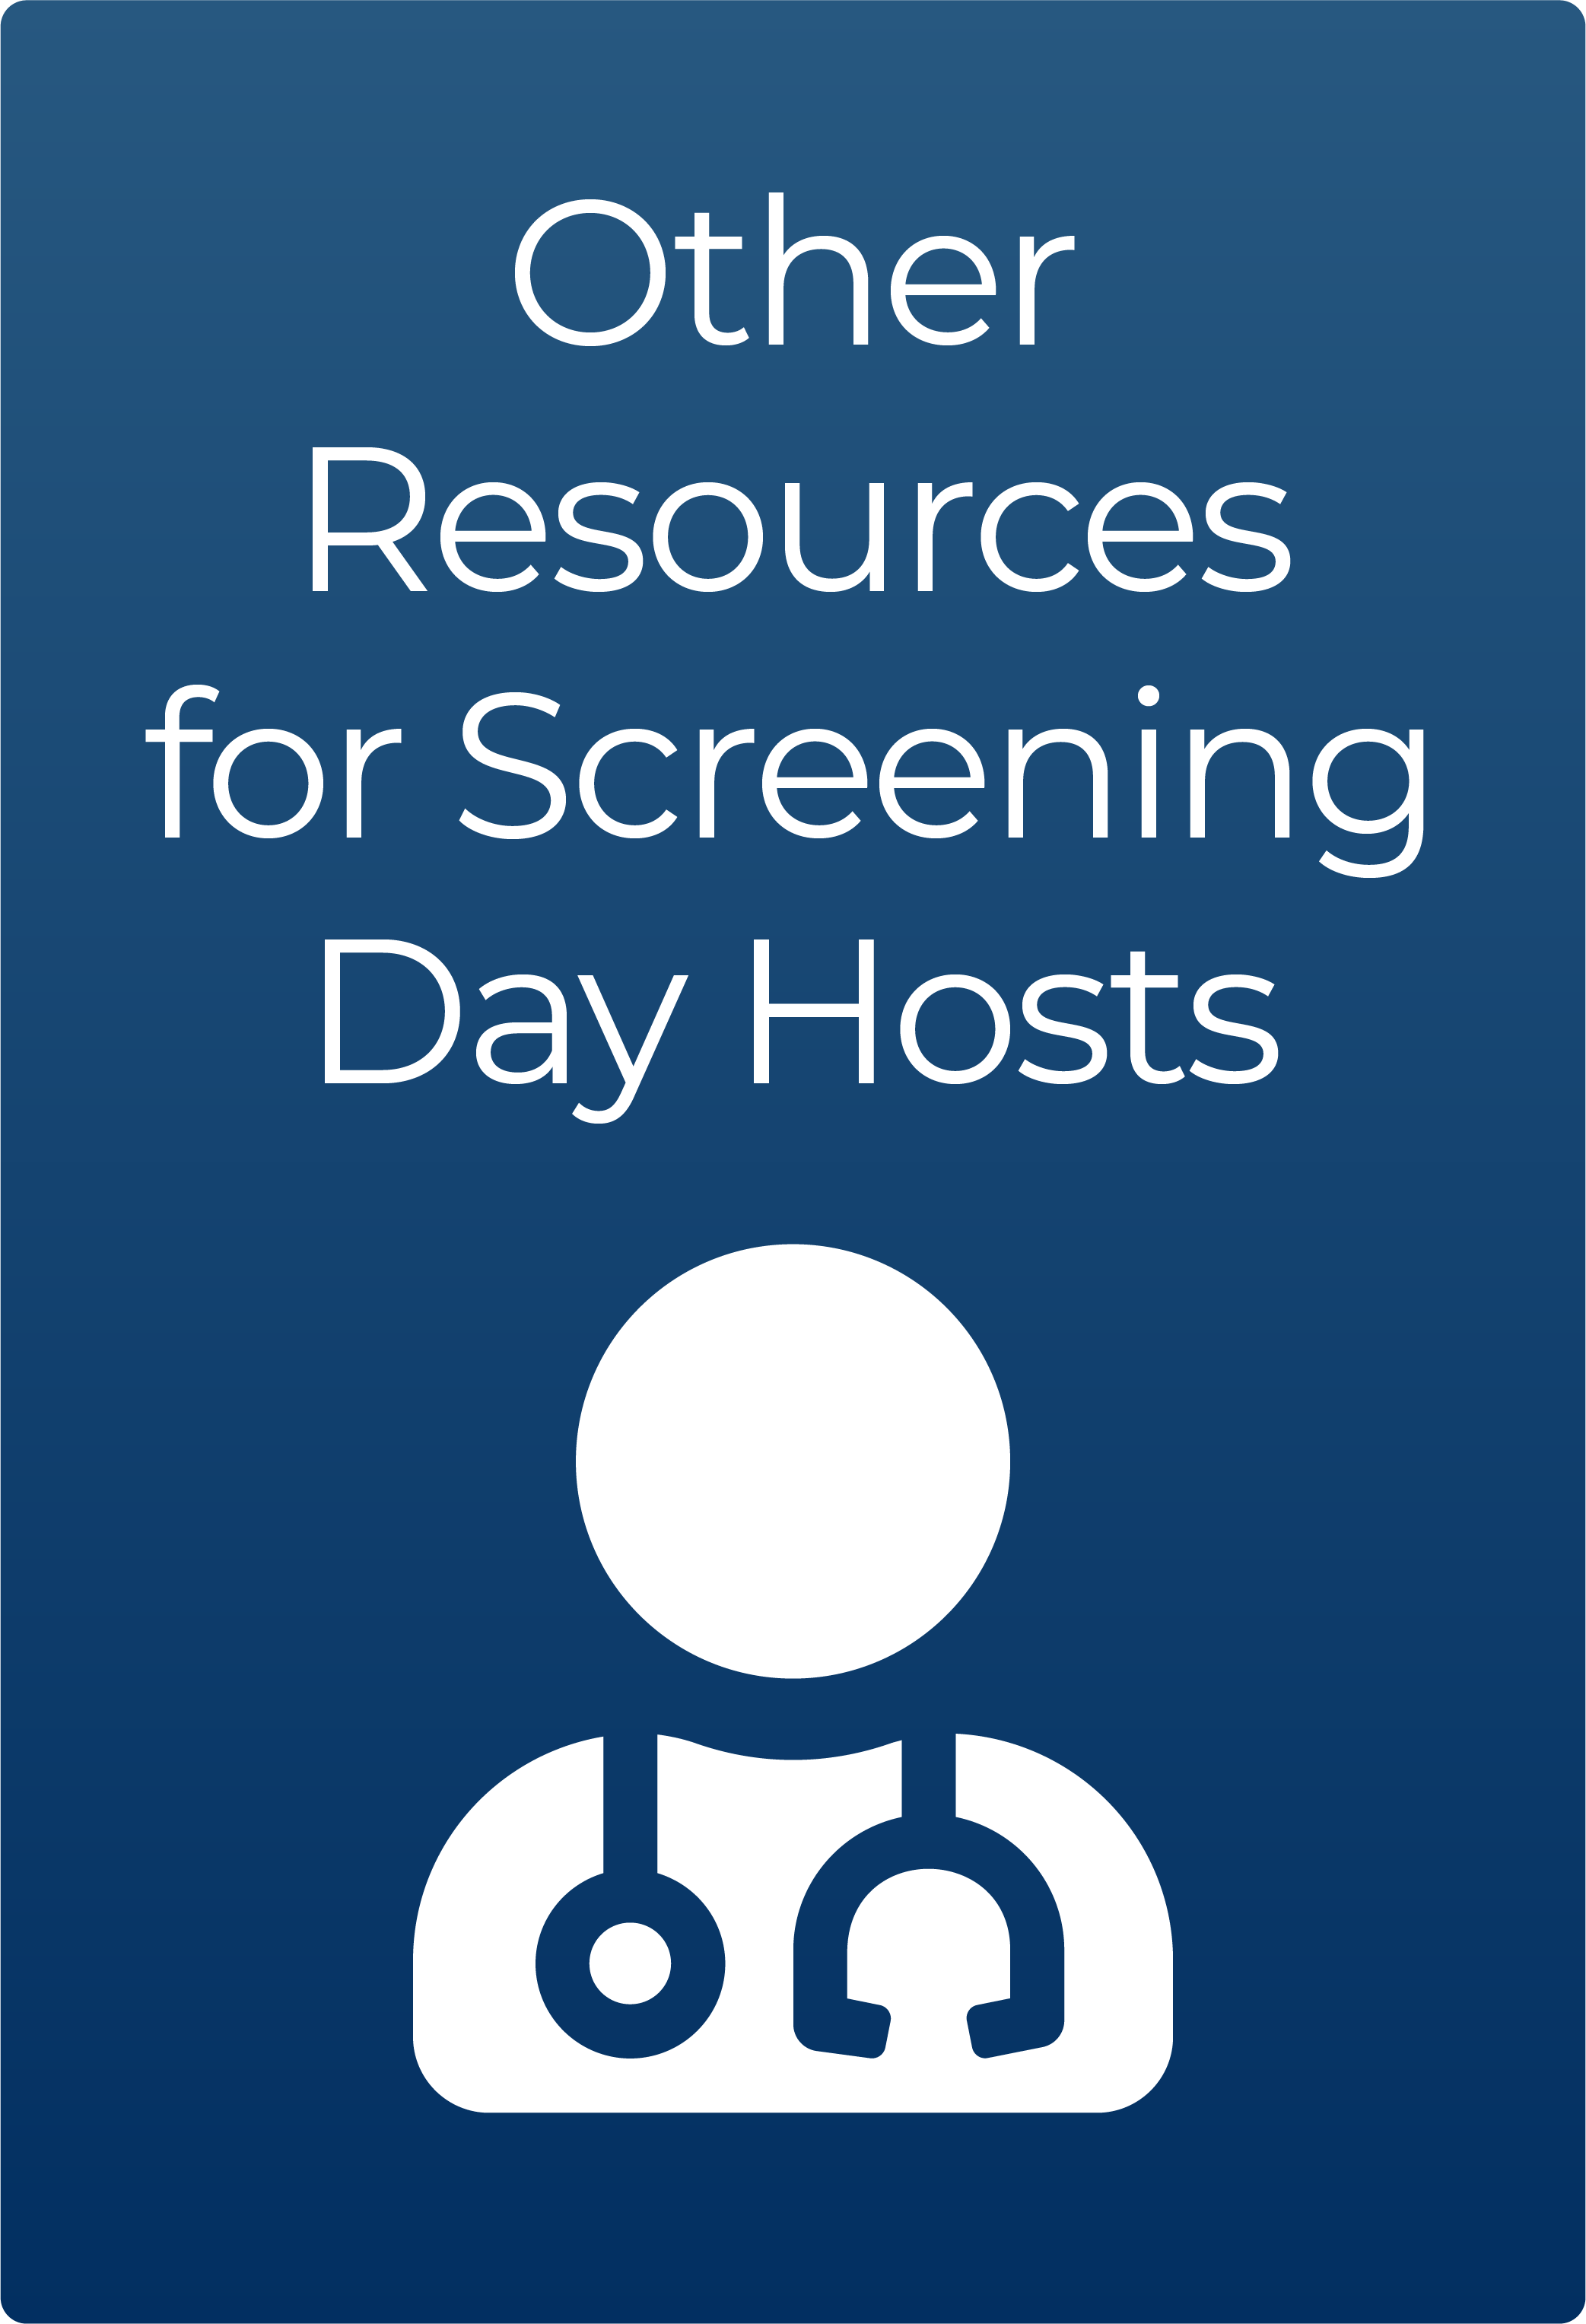 Other Resources for Screening Day Hosts